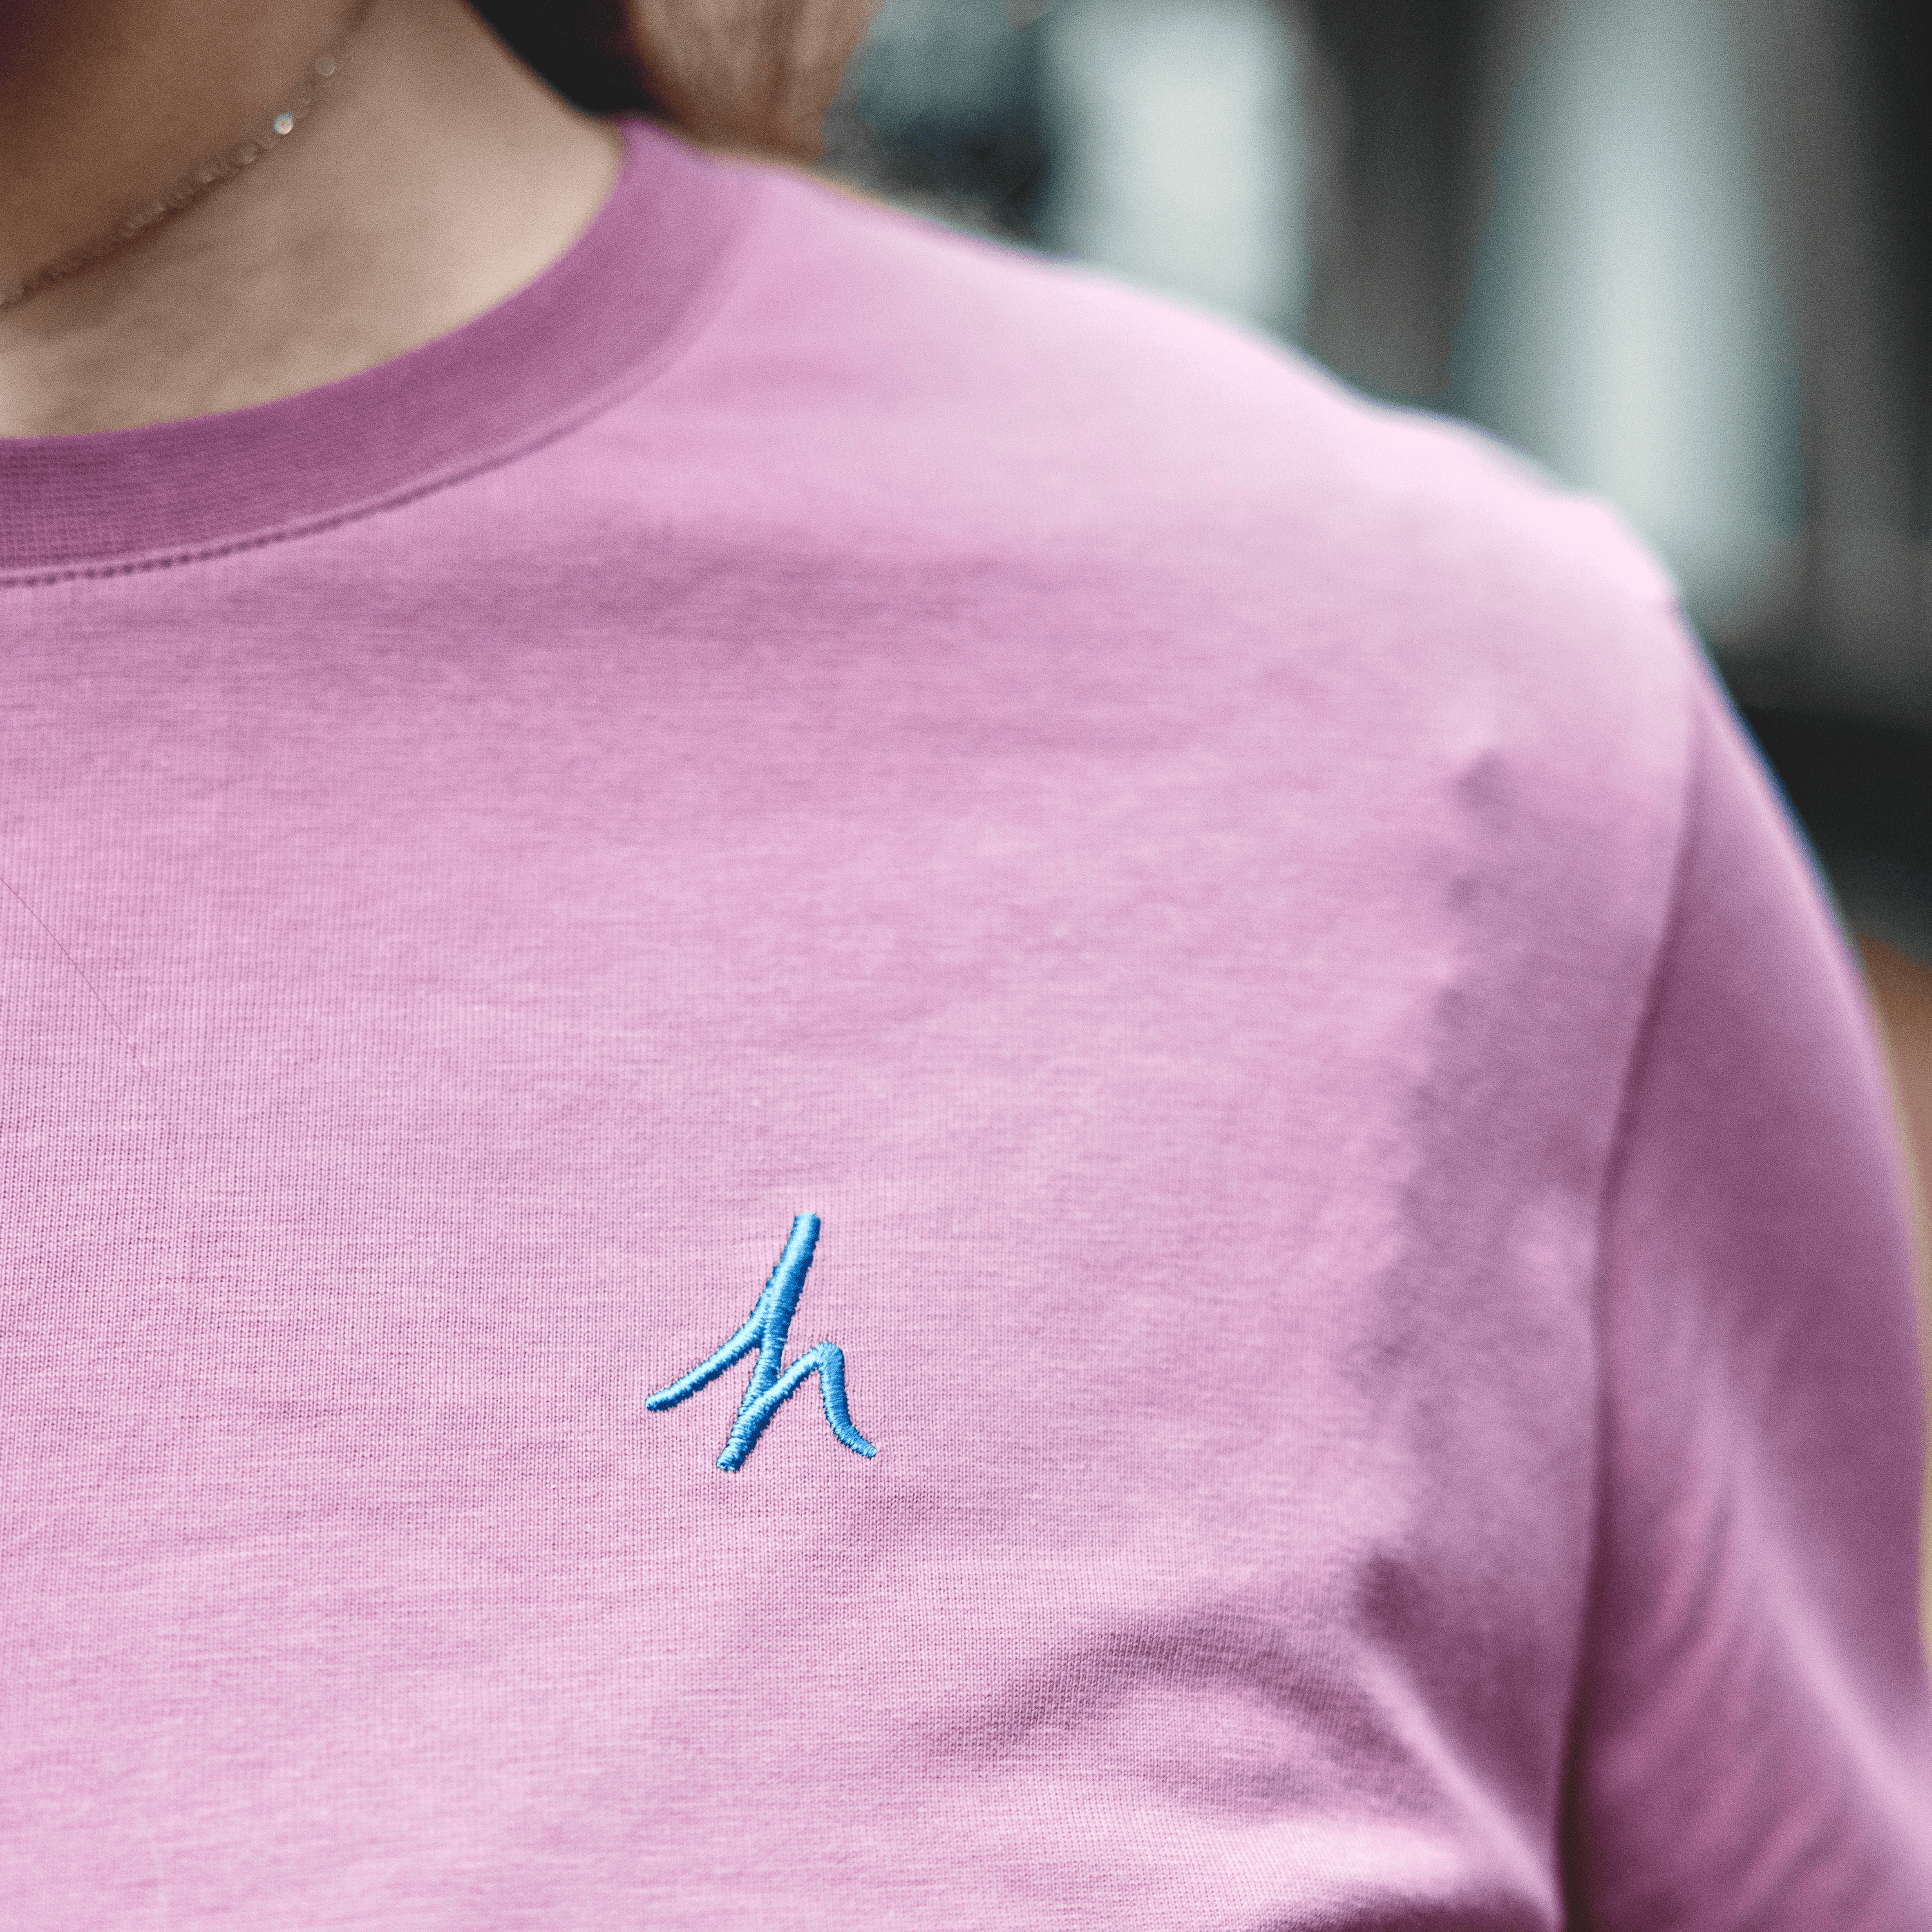 h clothing - close up of female model wearing pastel pink tshirt with blue h logo